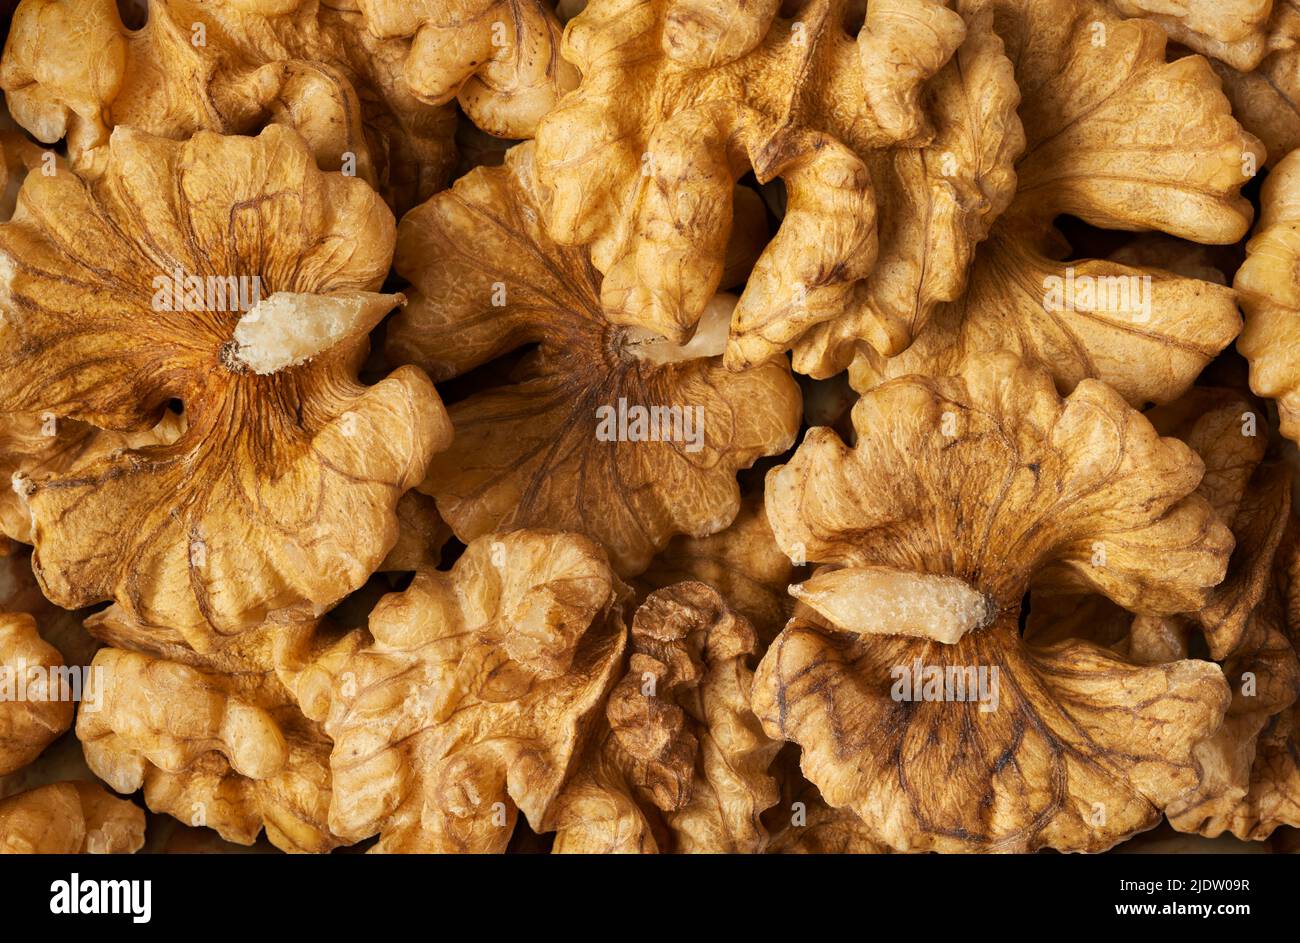 Big group of peeled walnuts, abstract food background Stock Photo